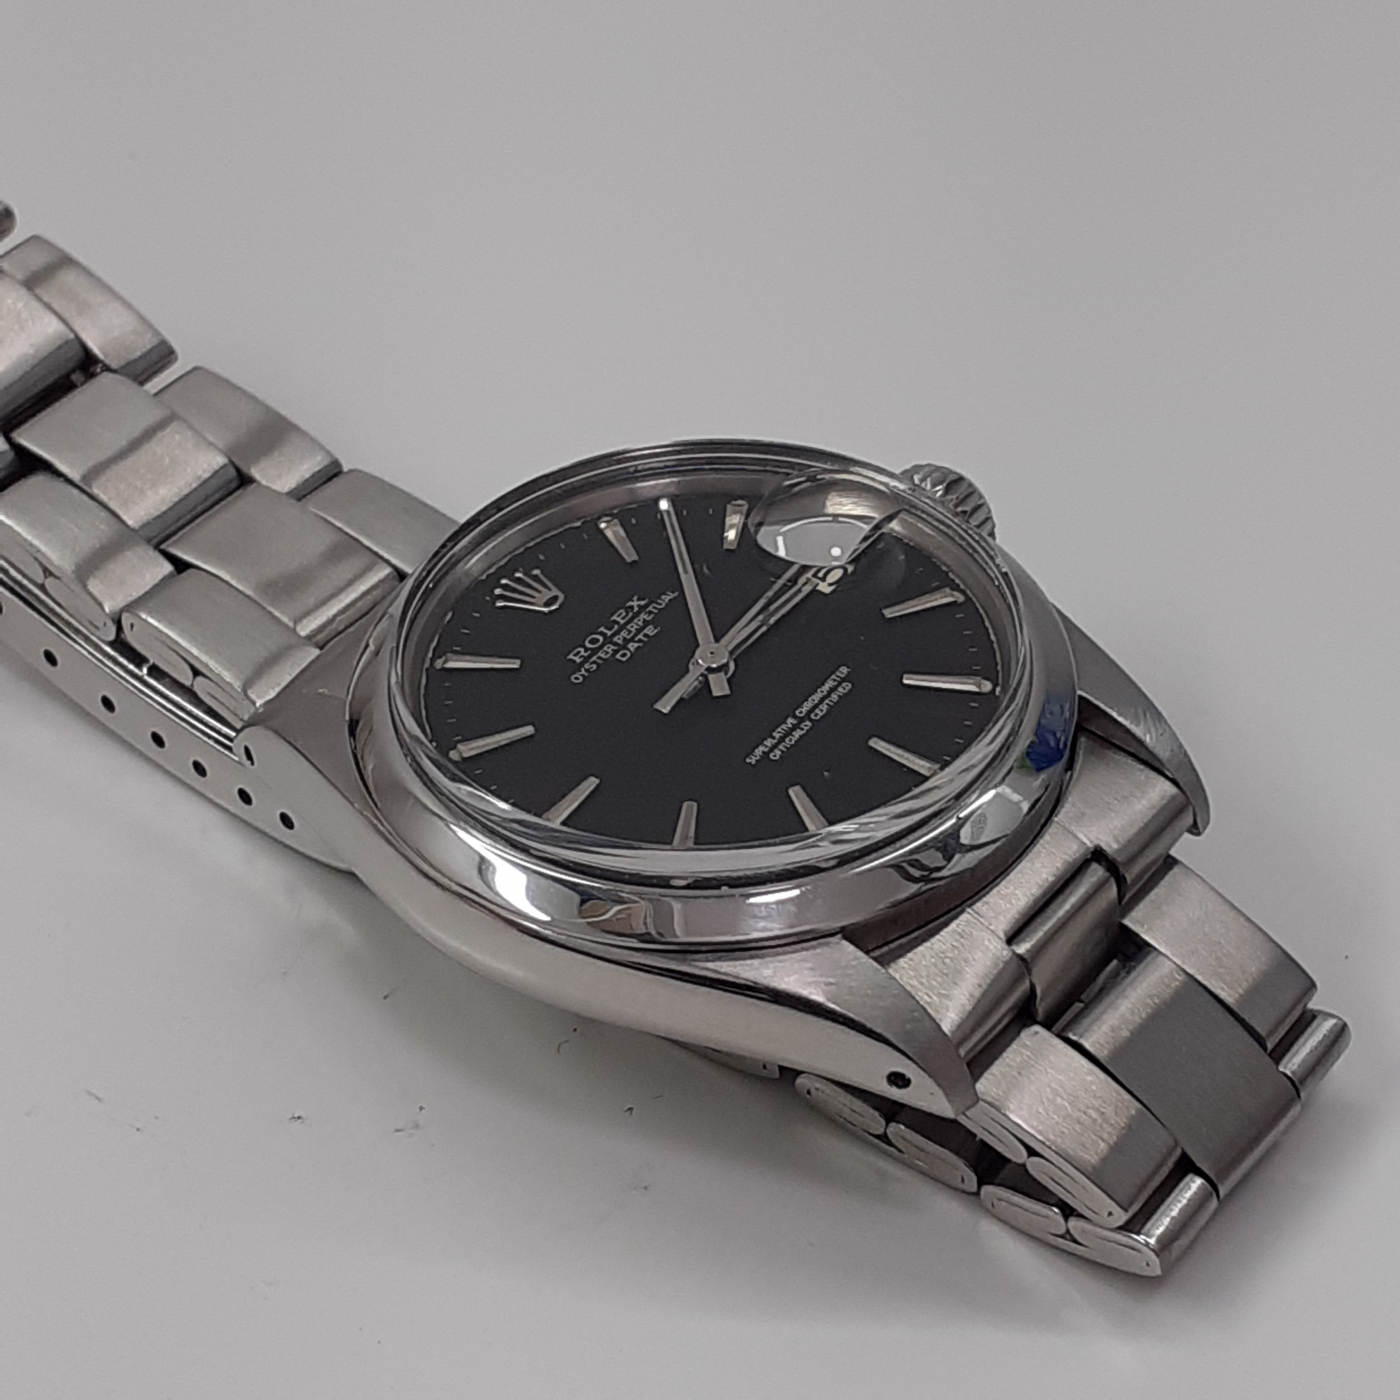 Rolex Mens Date 34mm Plastic Crystal Non Quick VERY RARE BLACK DIAL glossy finish 1500